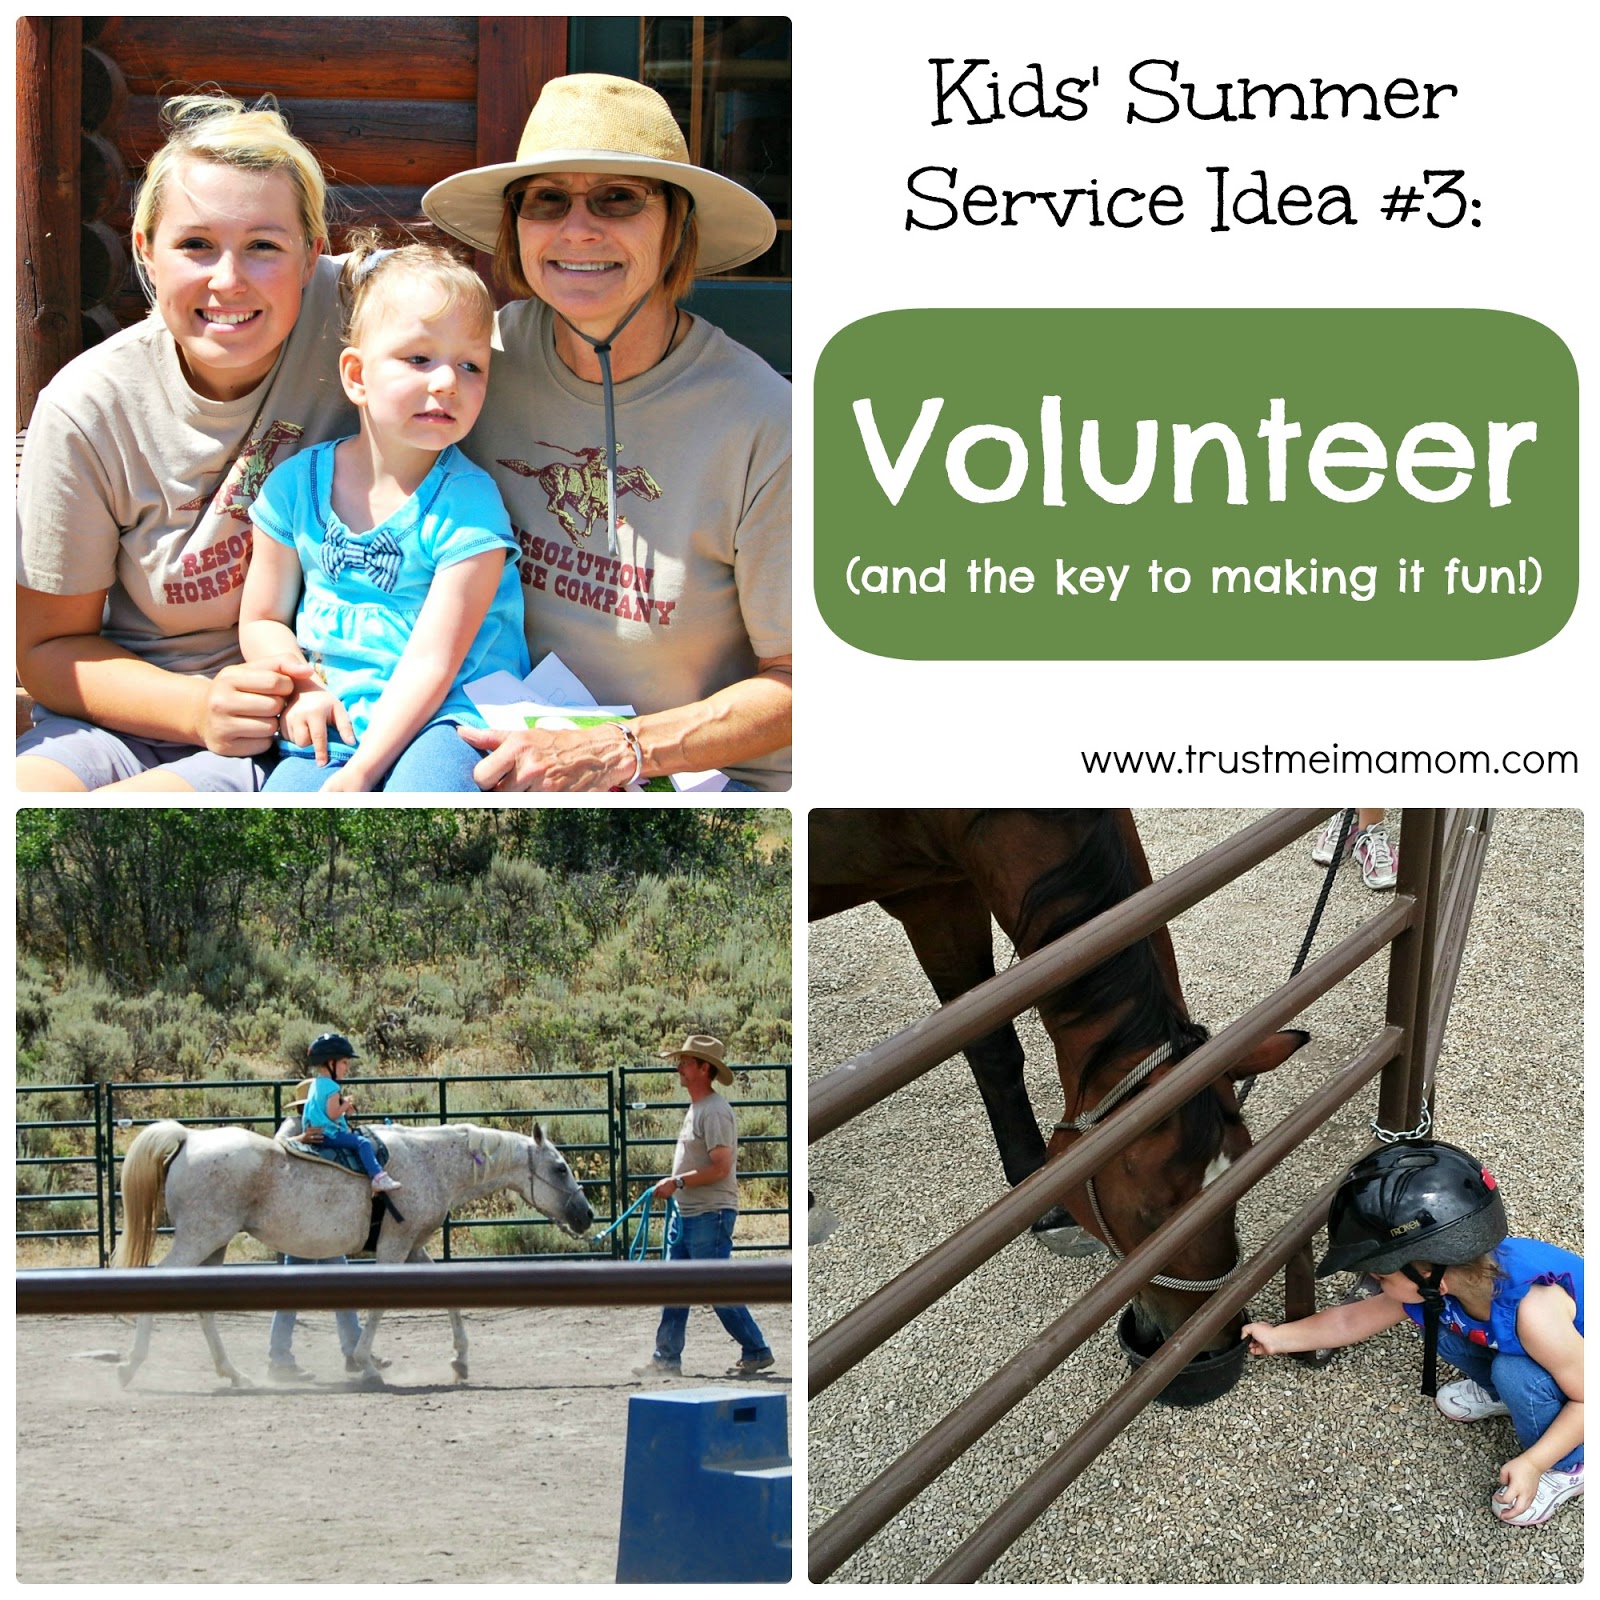 Fun Ways to Serve with Your Kids This Summer: Idea #3 Volunteer (and how to make it more fun!)